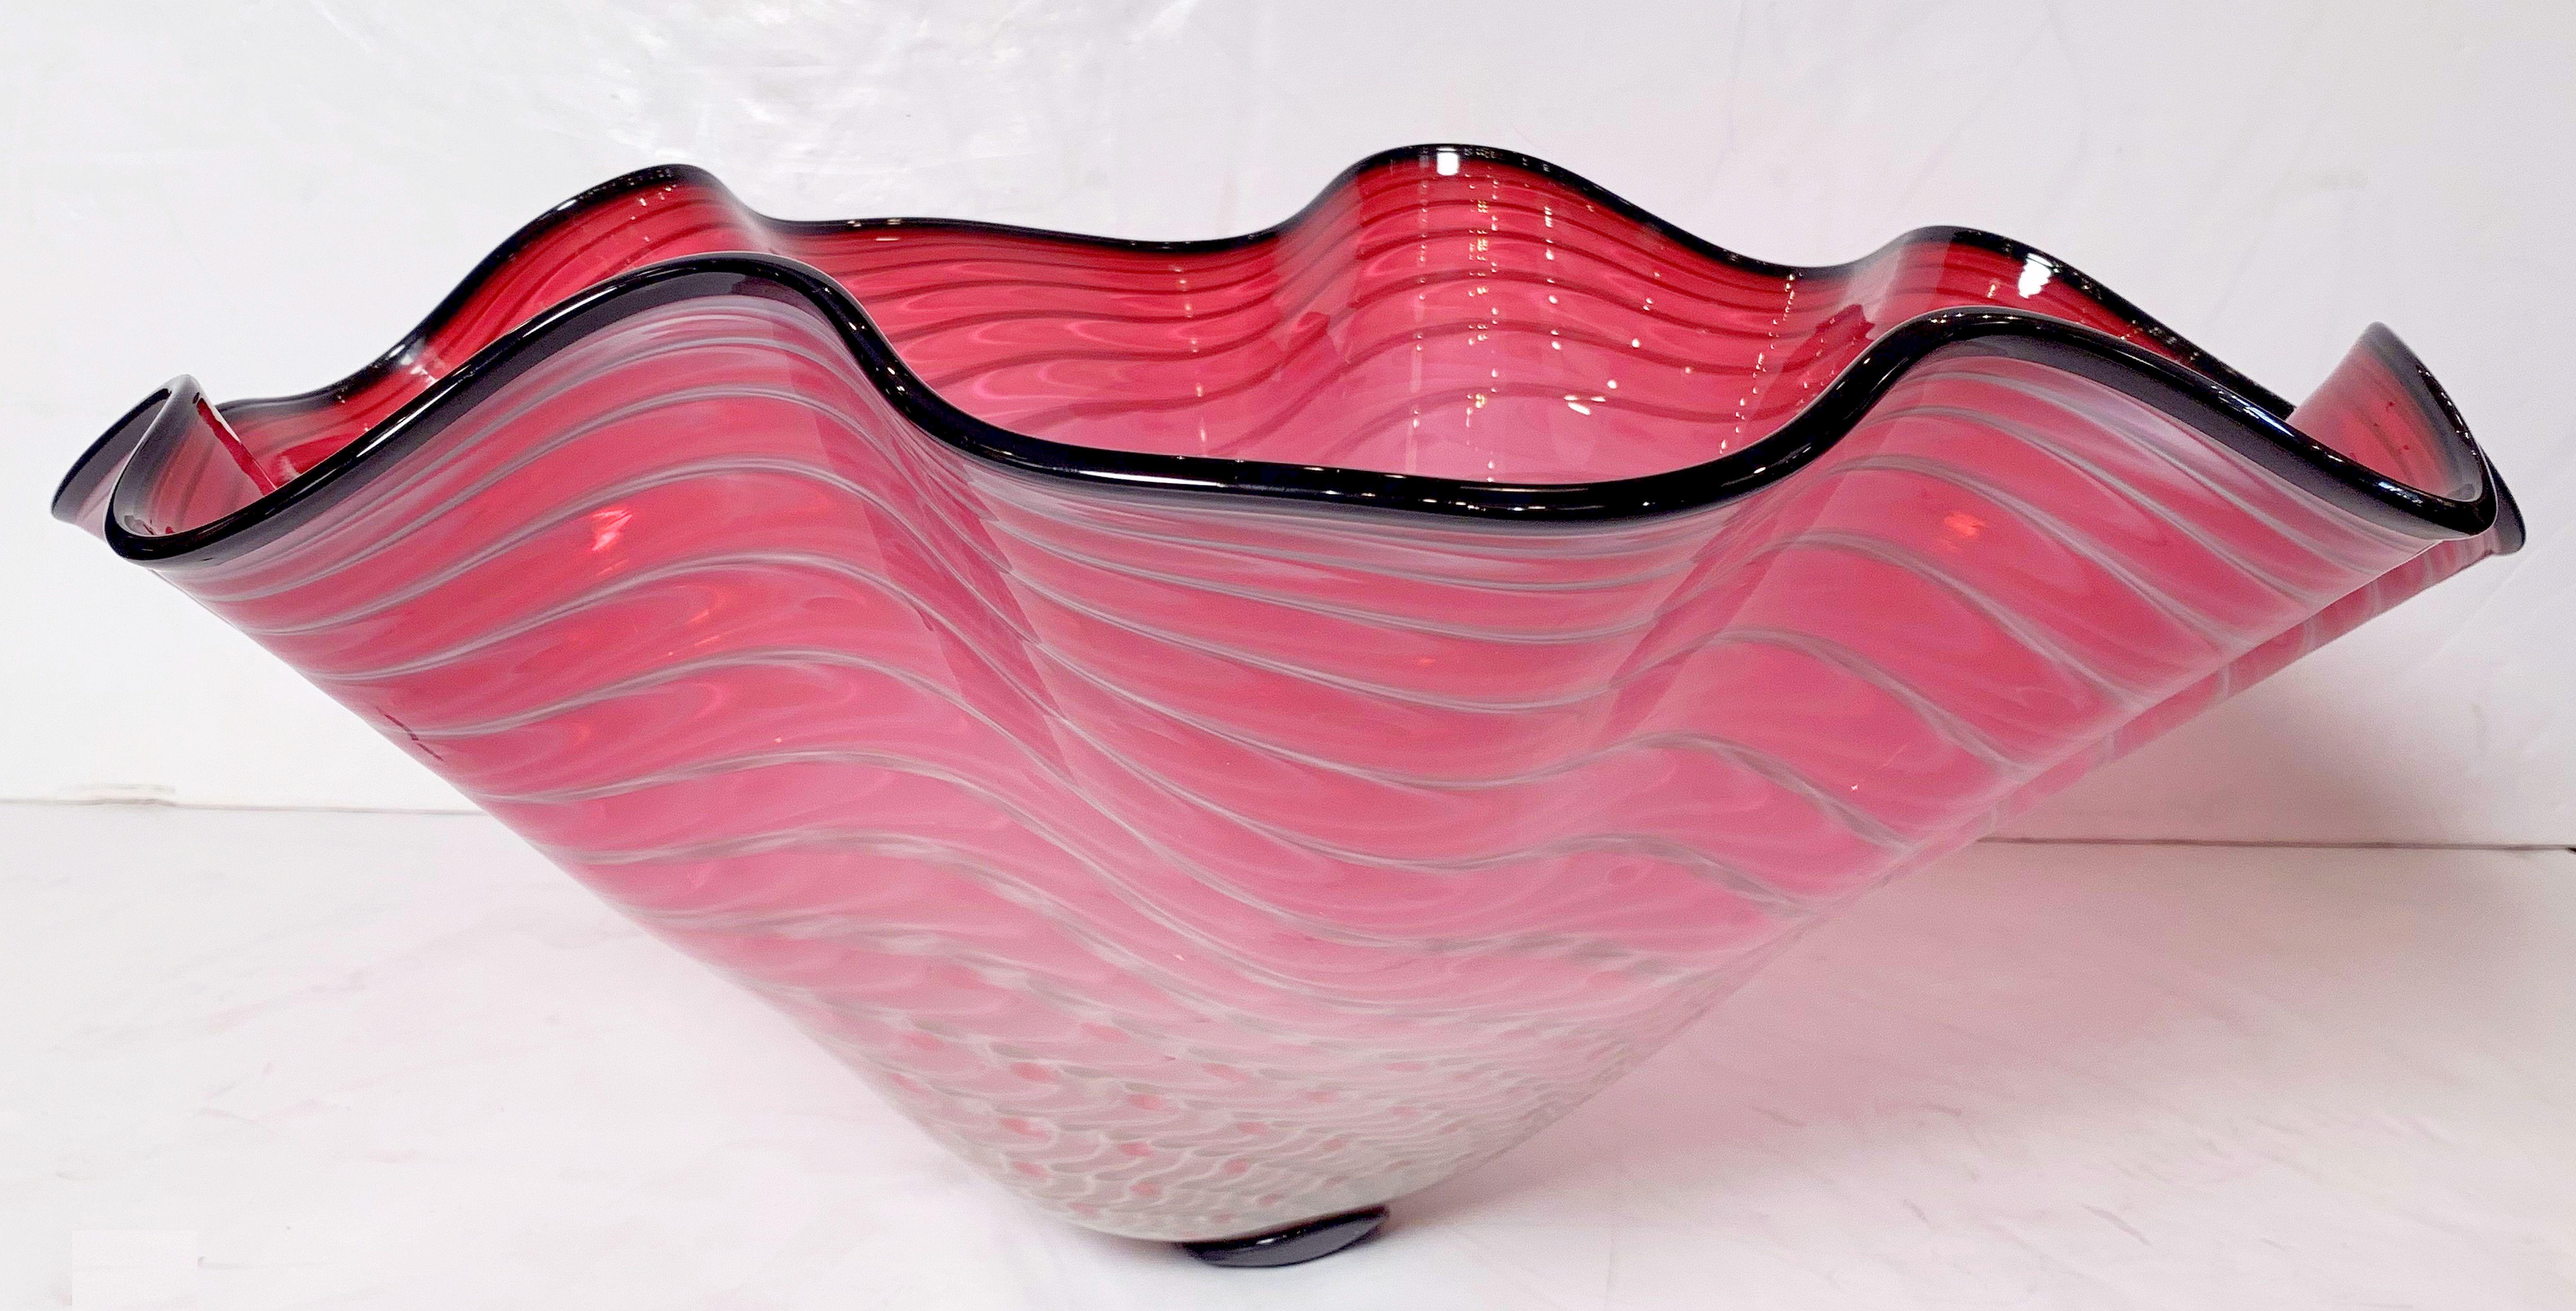 dale chihuly bowls